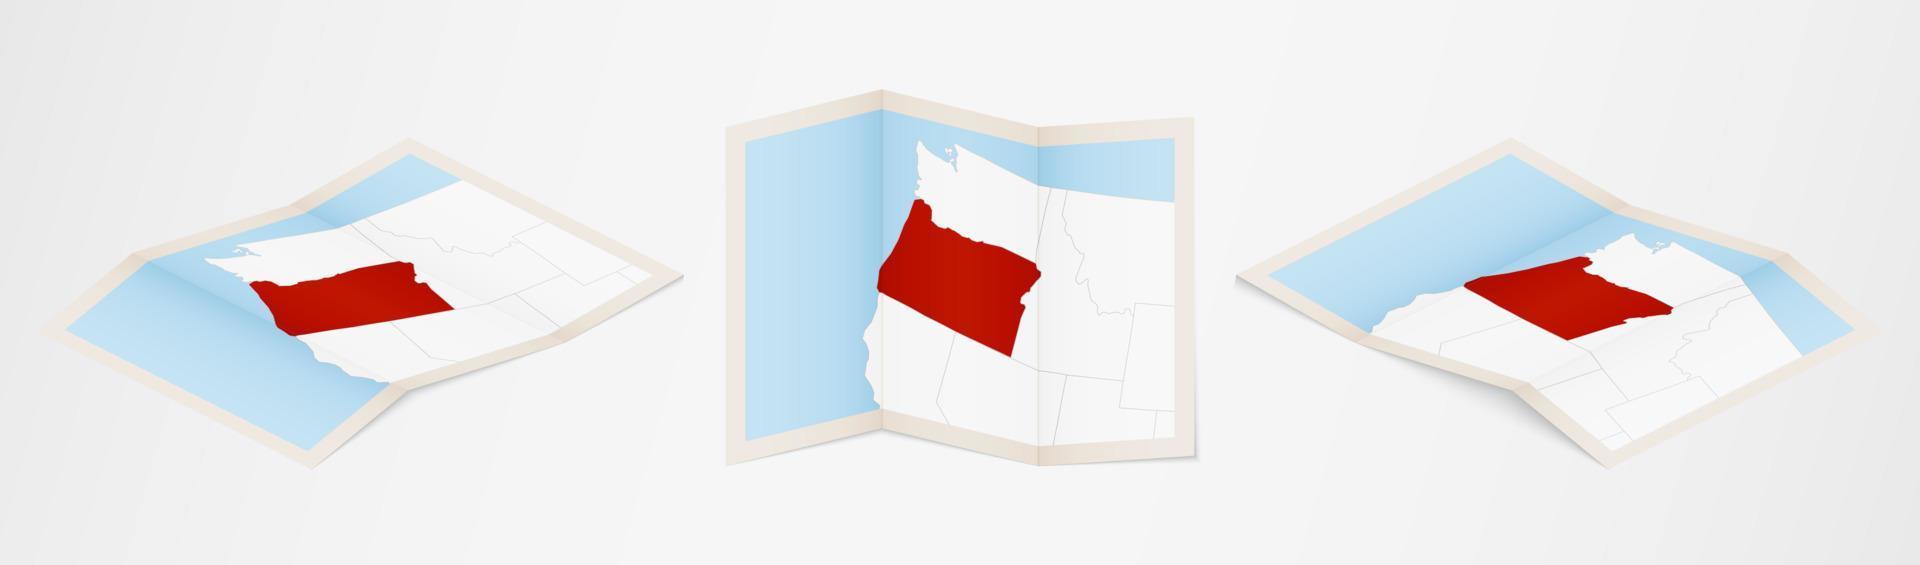 Folded map of Oregon in three different versions. vector